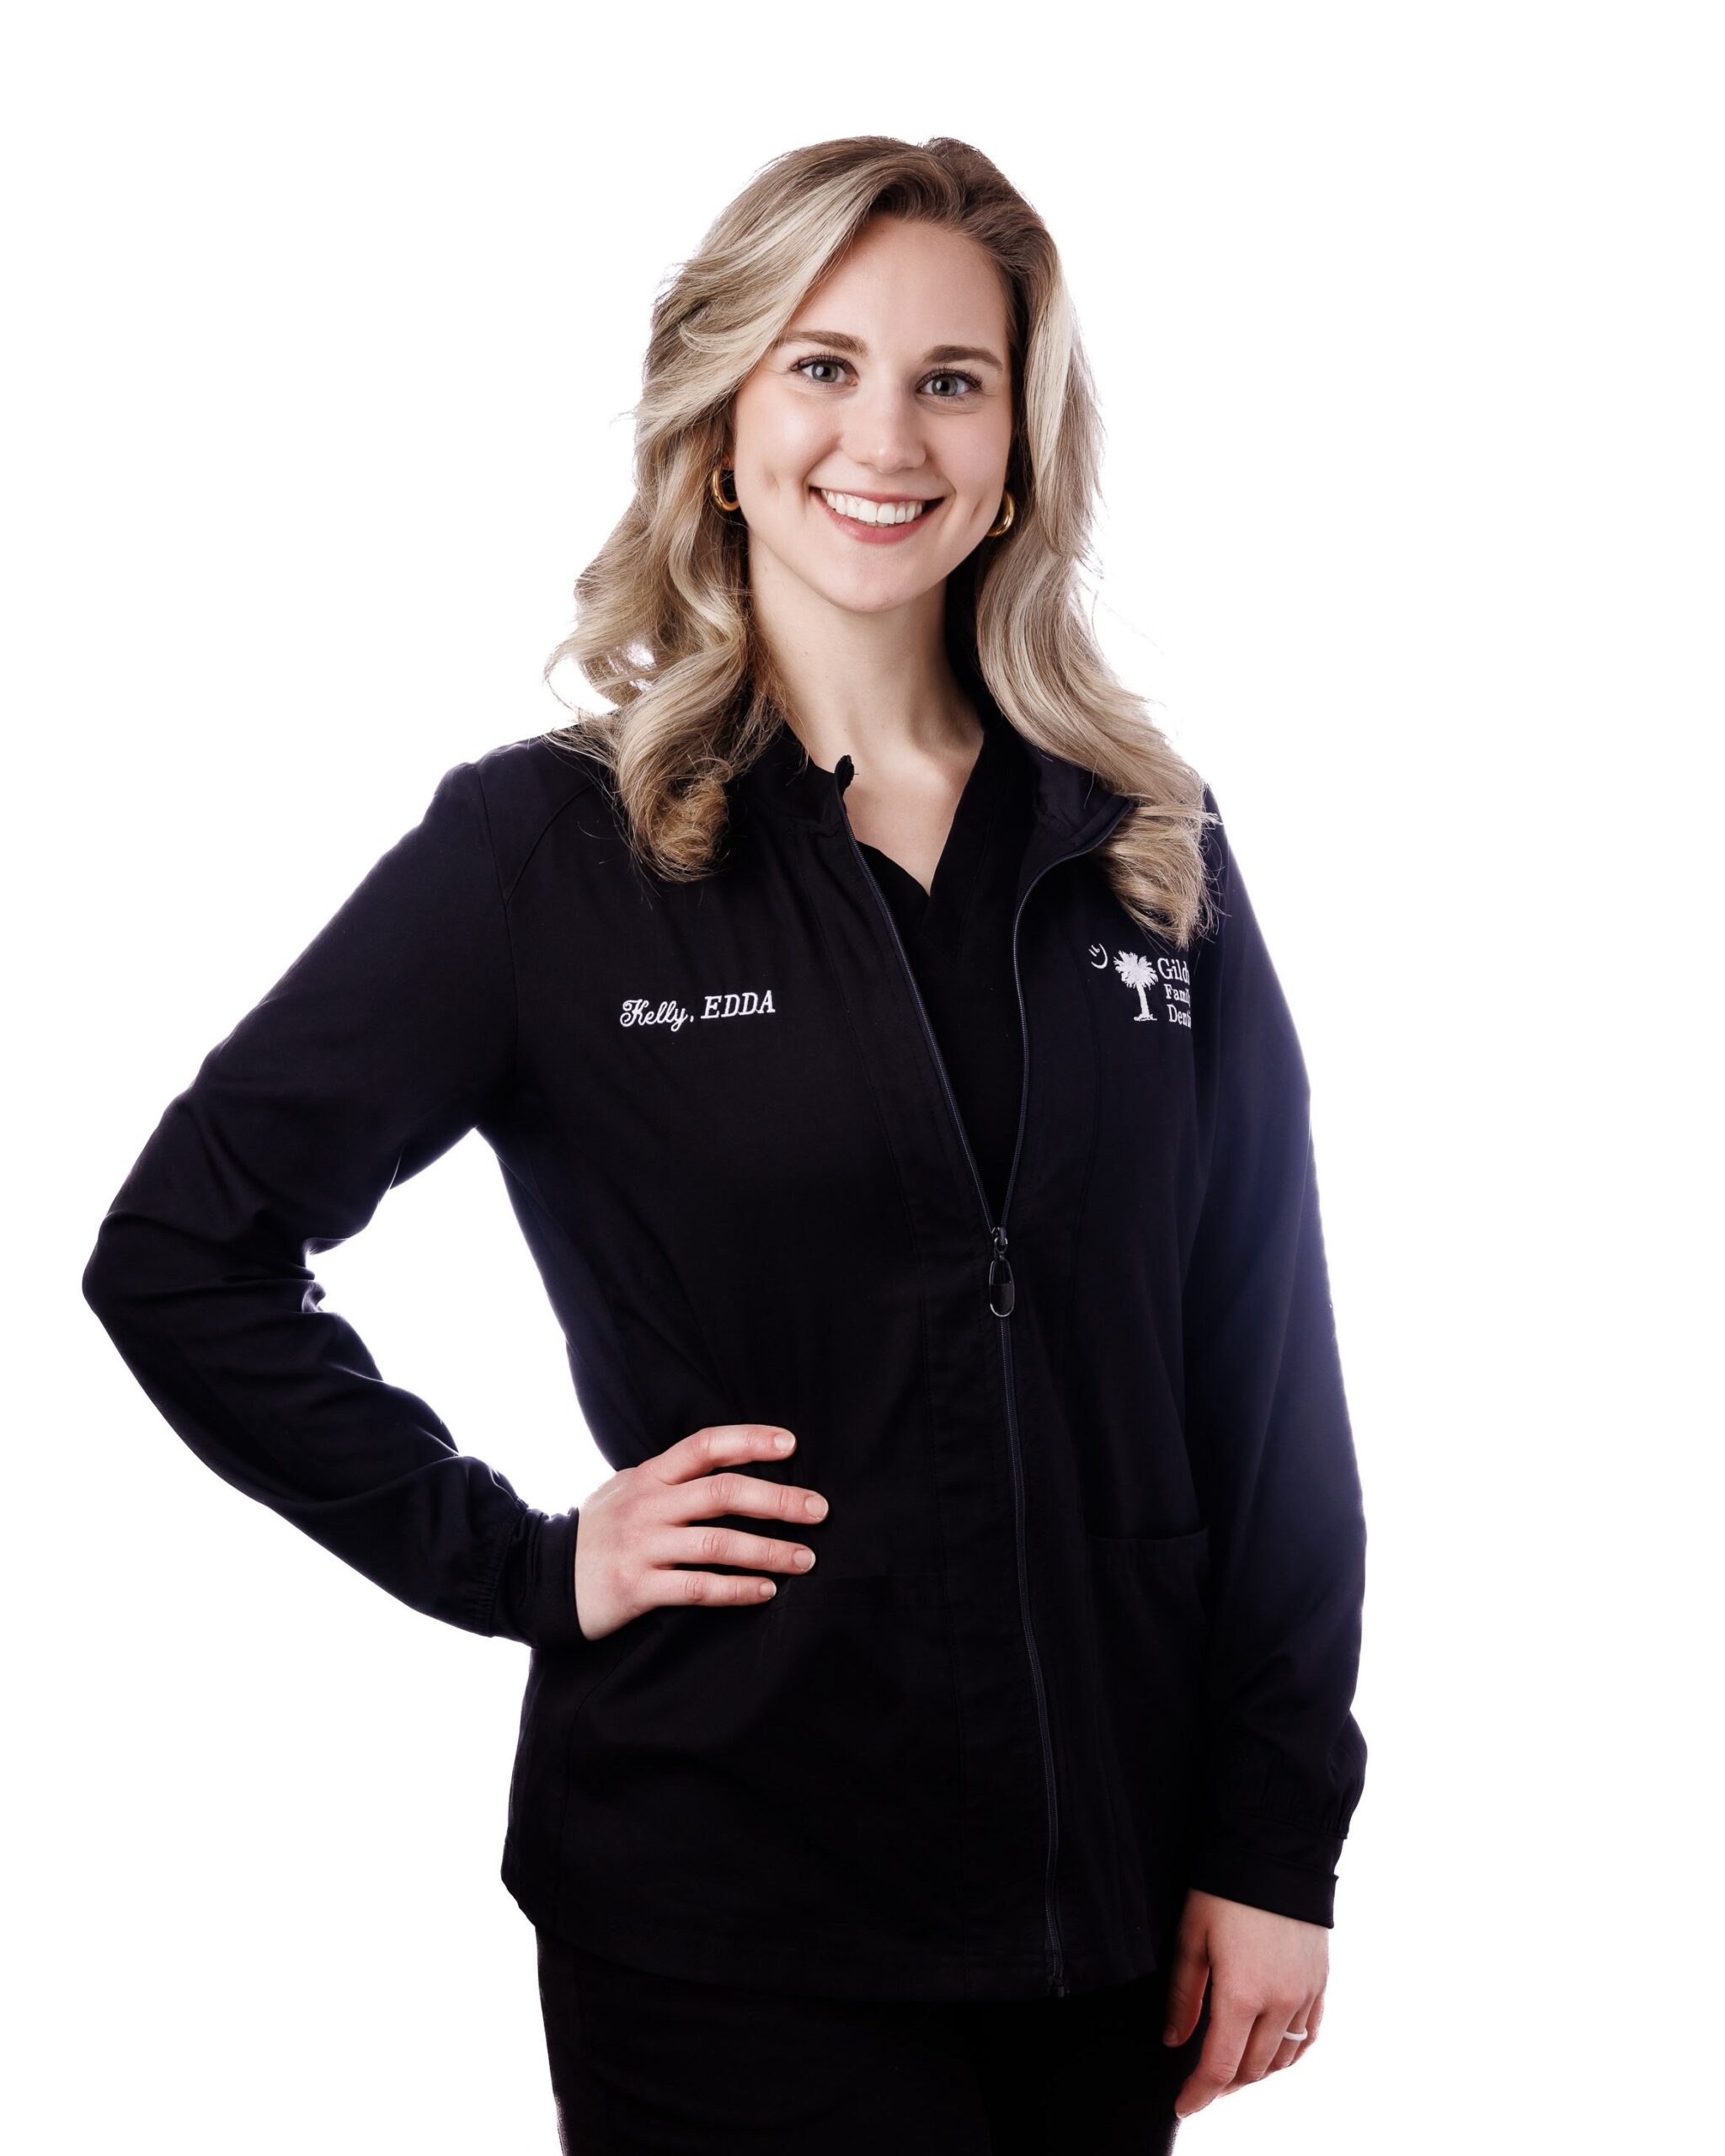 Kelly Rominger, Lead Expanded Duty Dental Assistant and Director of Marketing, wearing a black smock in the doorway at Gildner Family Dentistry in Lexington, SC